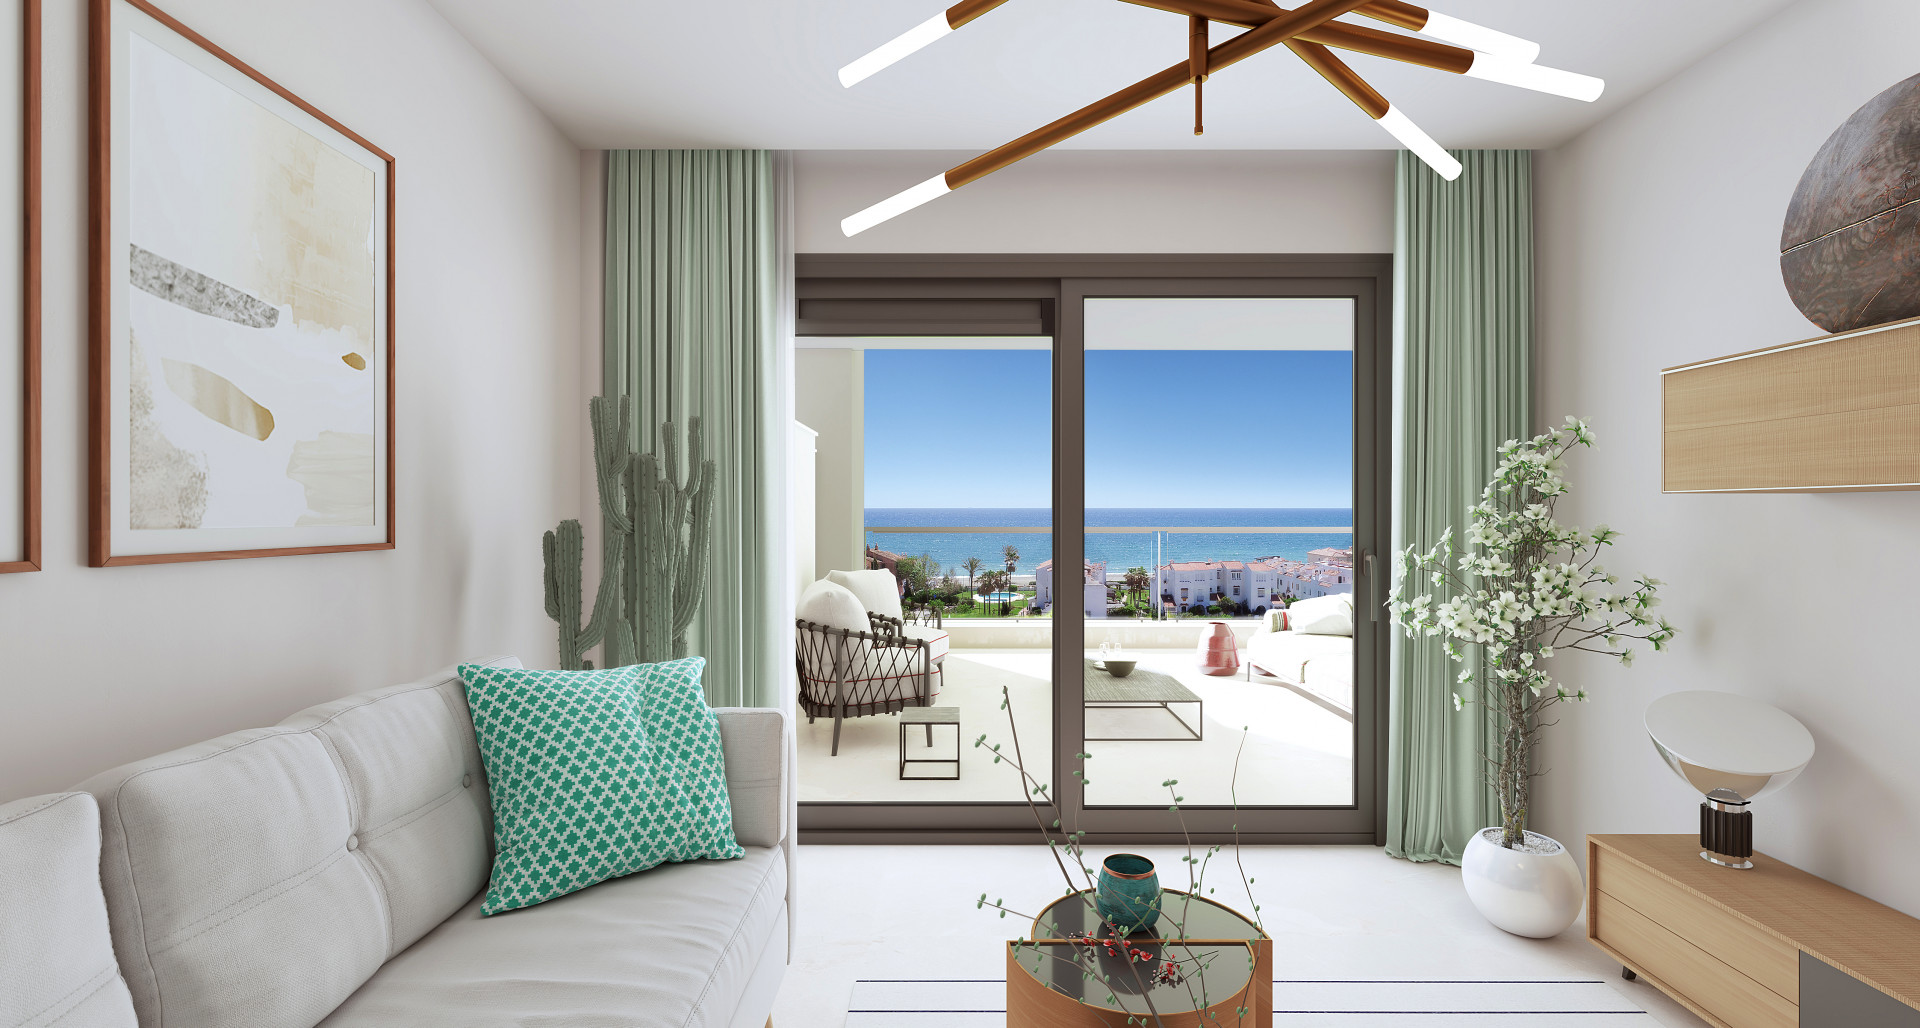 Solemar: Apartments with amazing seaviews in Casares Beach. | Image 7